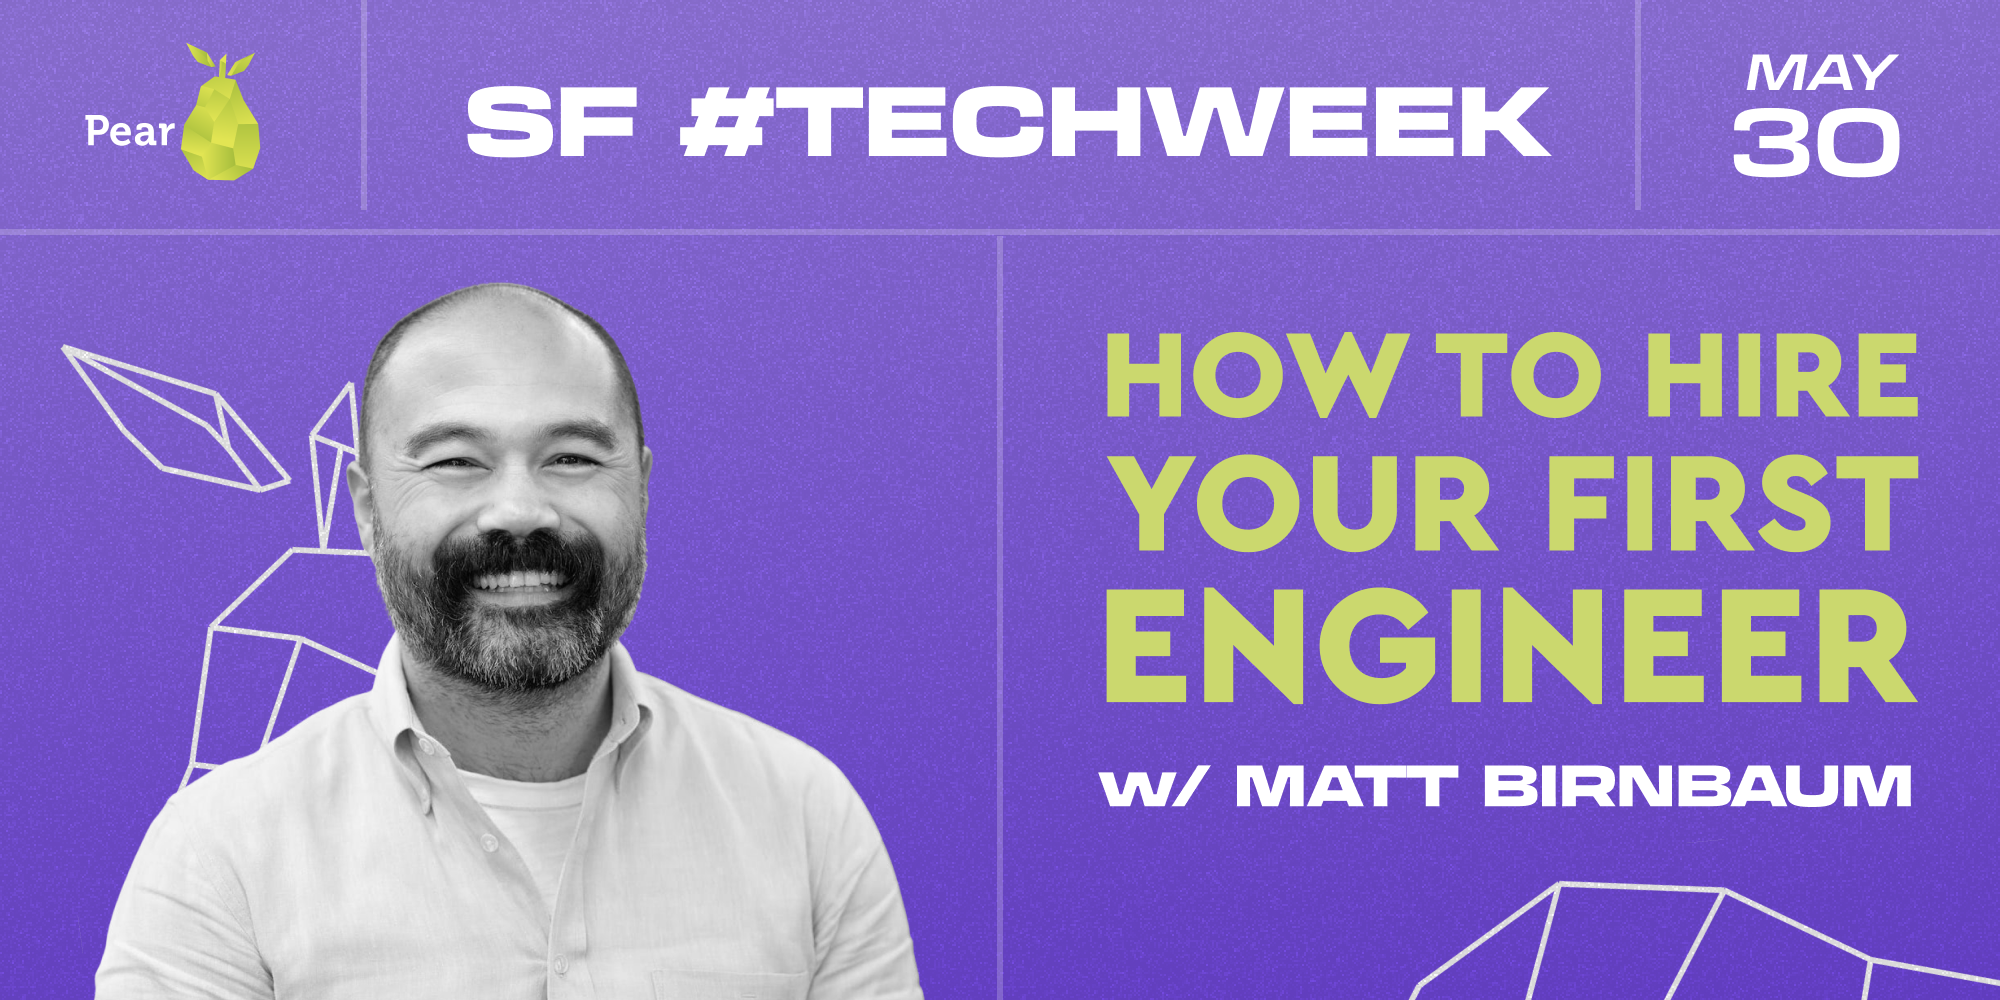 SF #TechWeek x Pear VC: How to hire your first engineer with Matt Birnbaum, Talent Partner at Pear VC